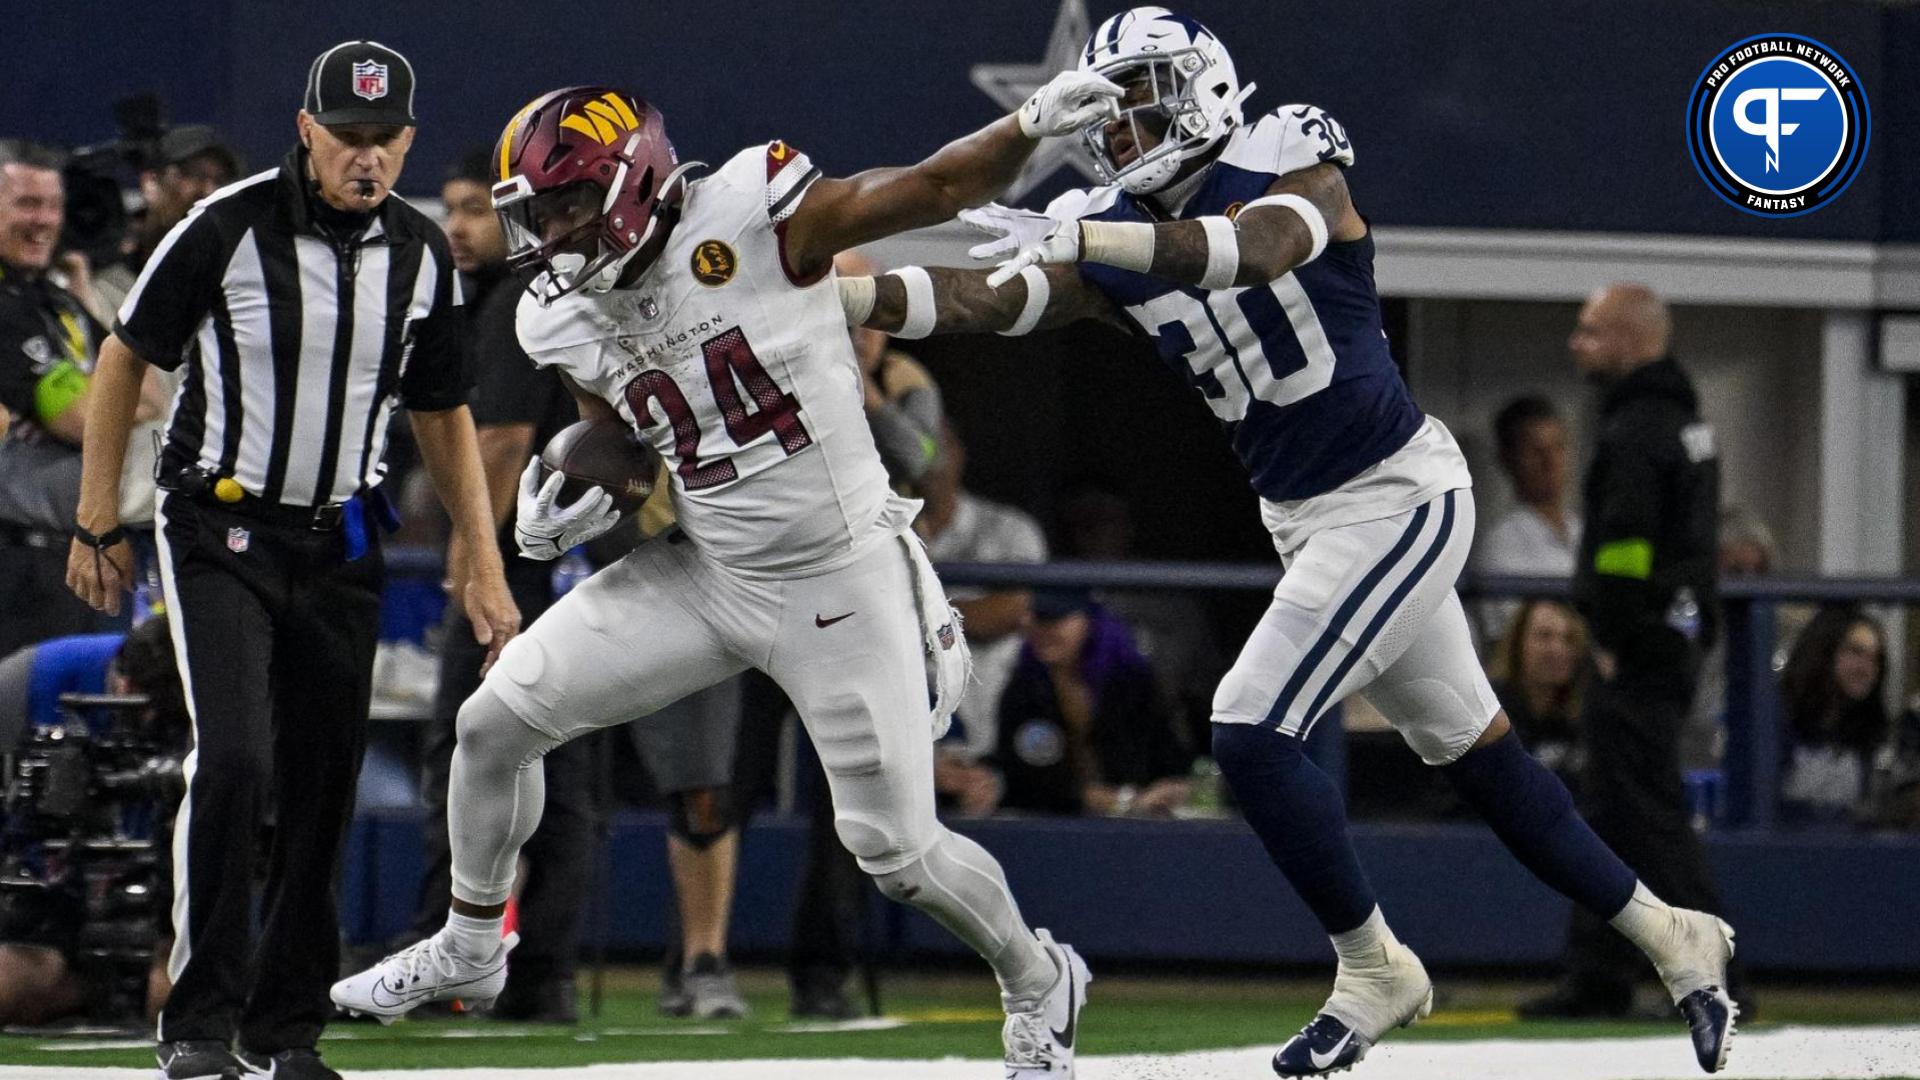 Antonio Gibson (24) and Dallas Cowboys safety Juanyeh Thomas (30) in action during the game between the Dallas Cowboys and the Washington Commanders at AT&T Stadium.